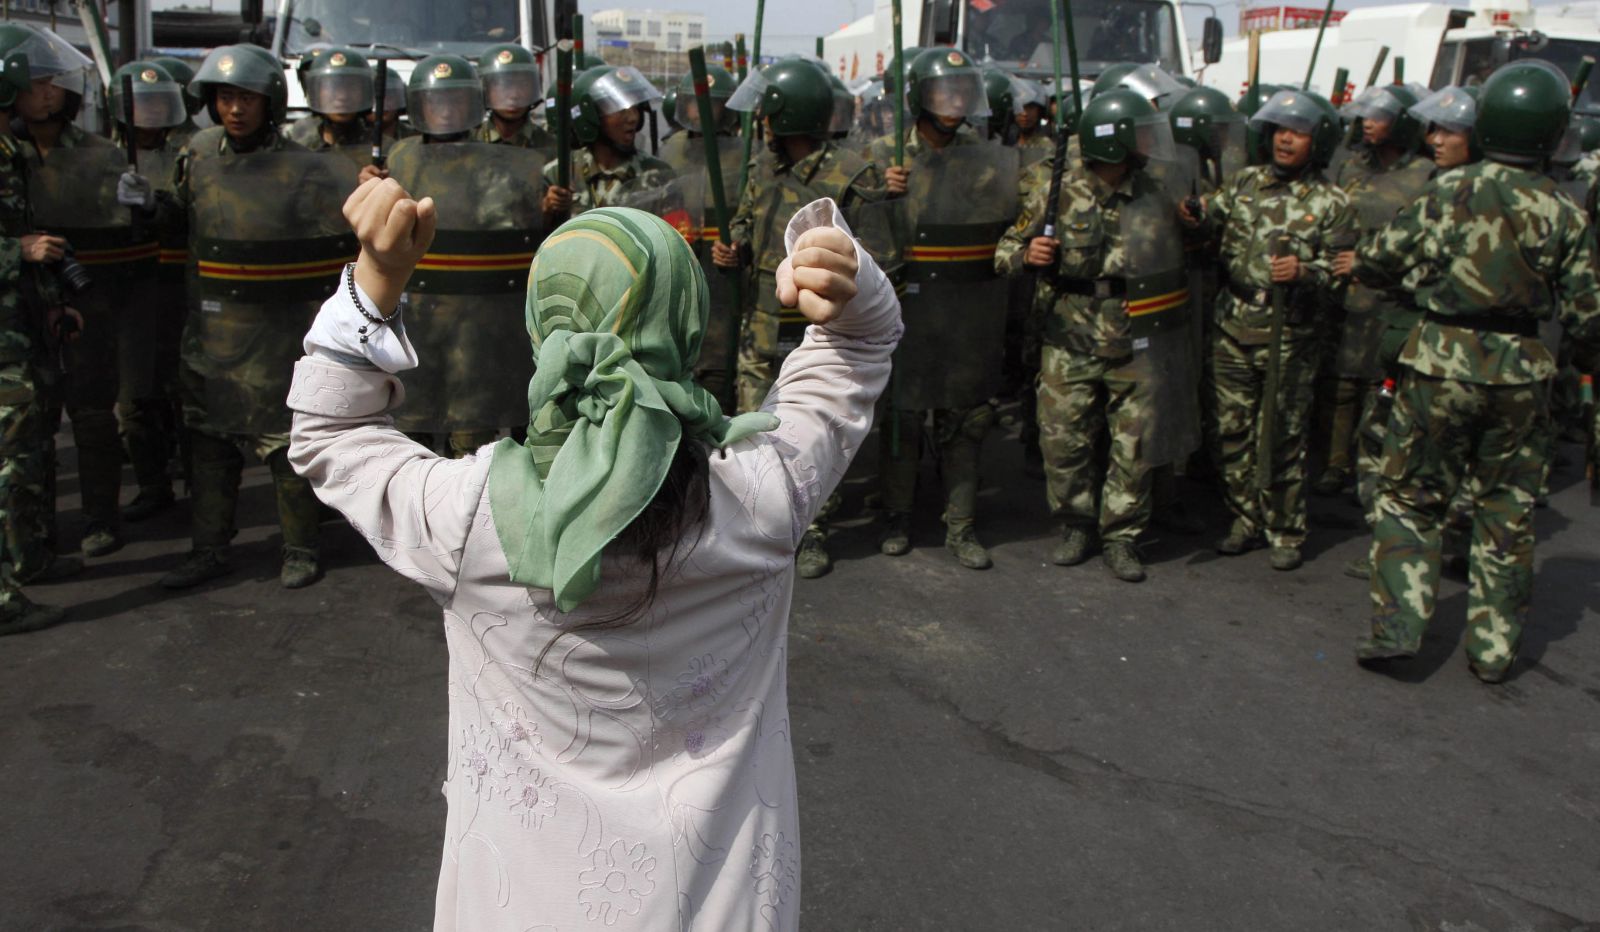 China is touting its protection of human rights in a Muslim-majority region riven by violence